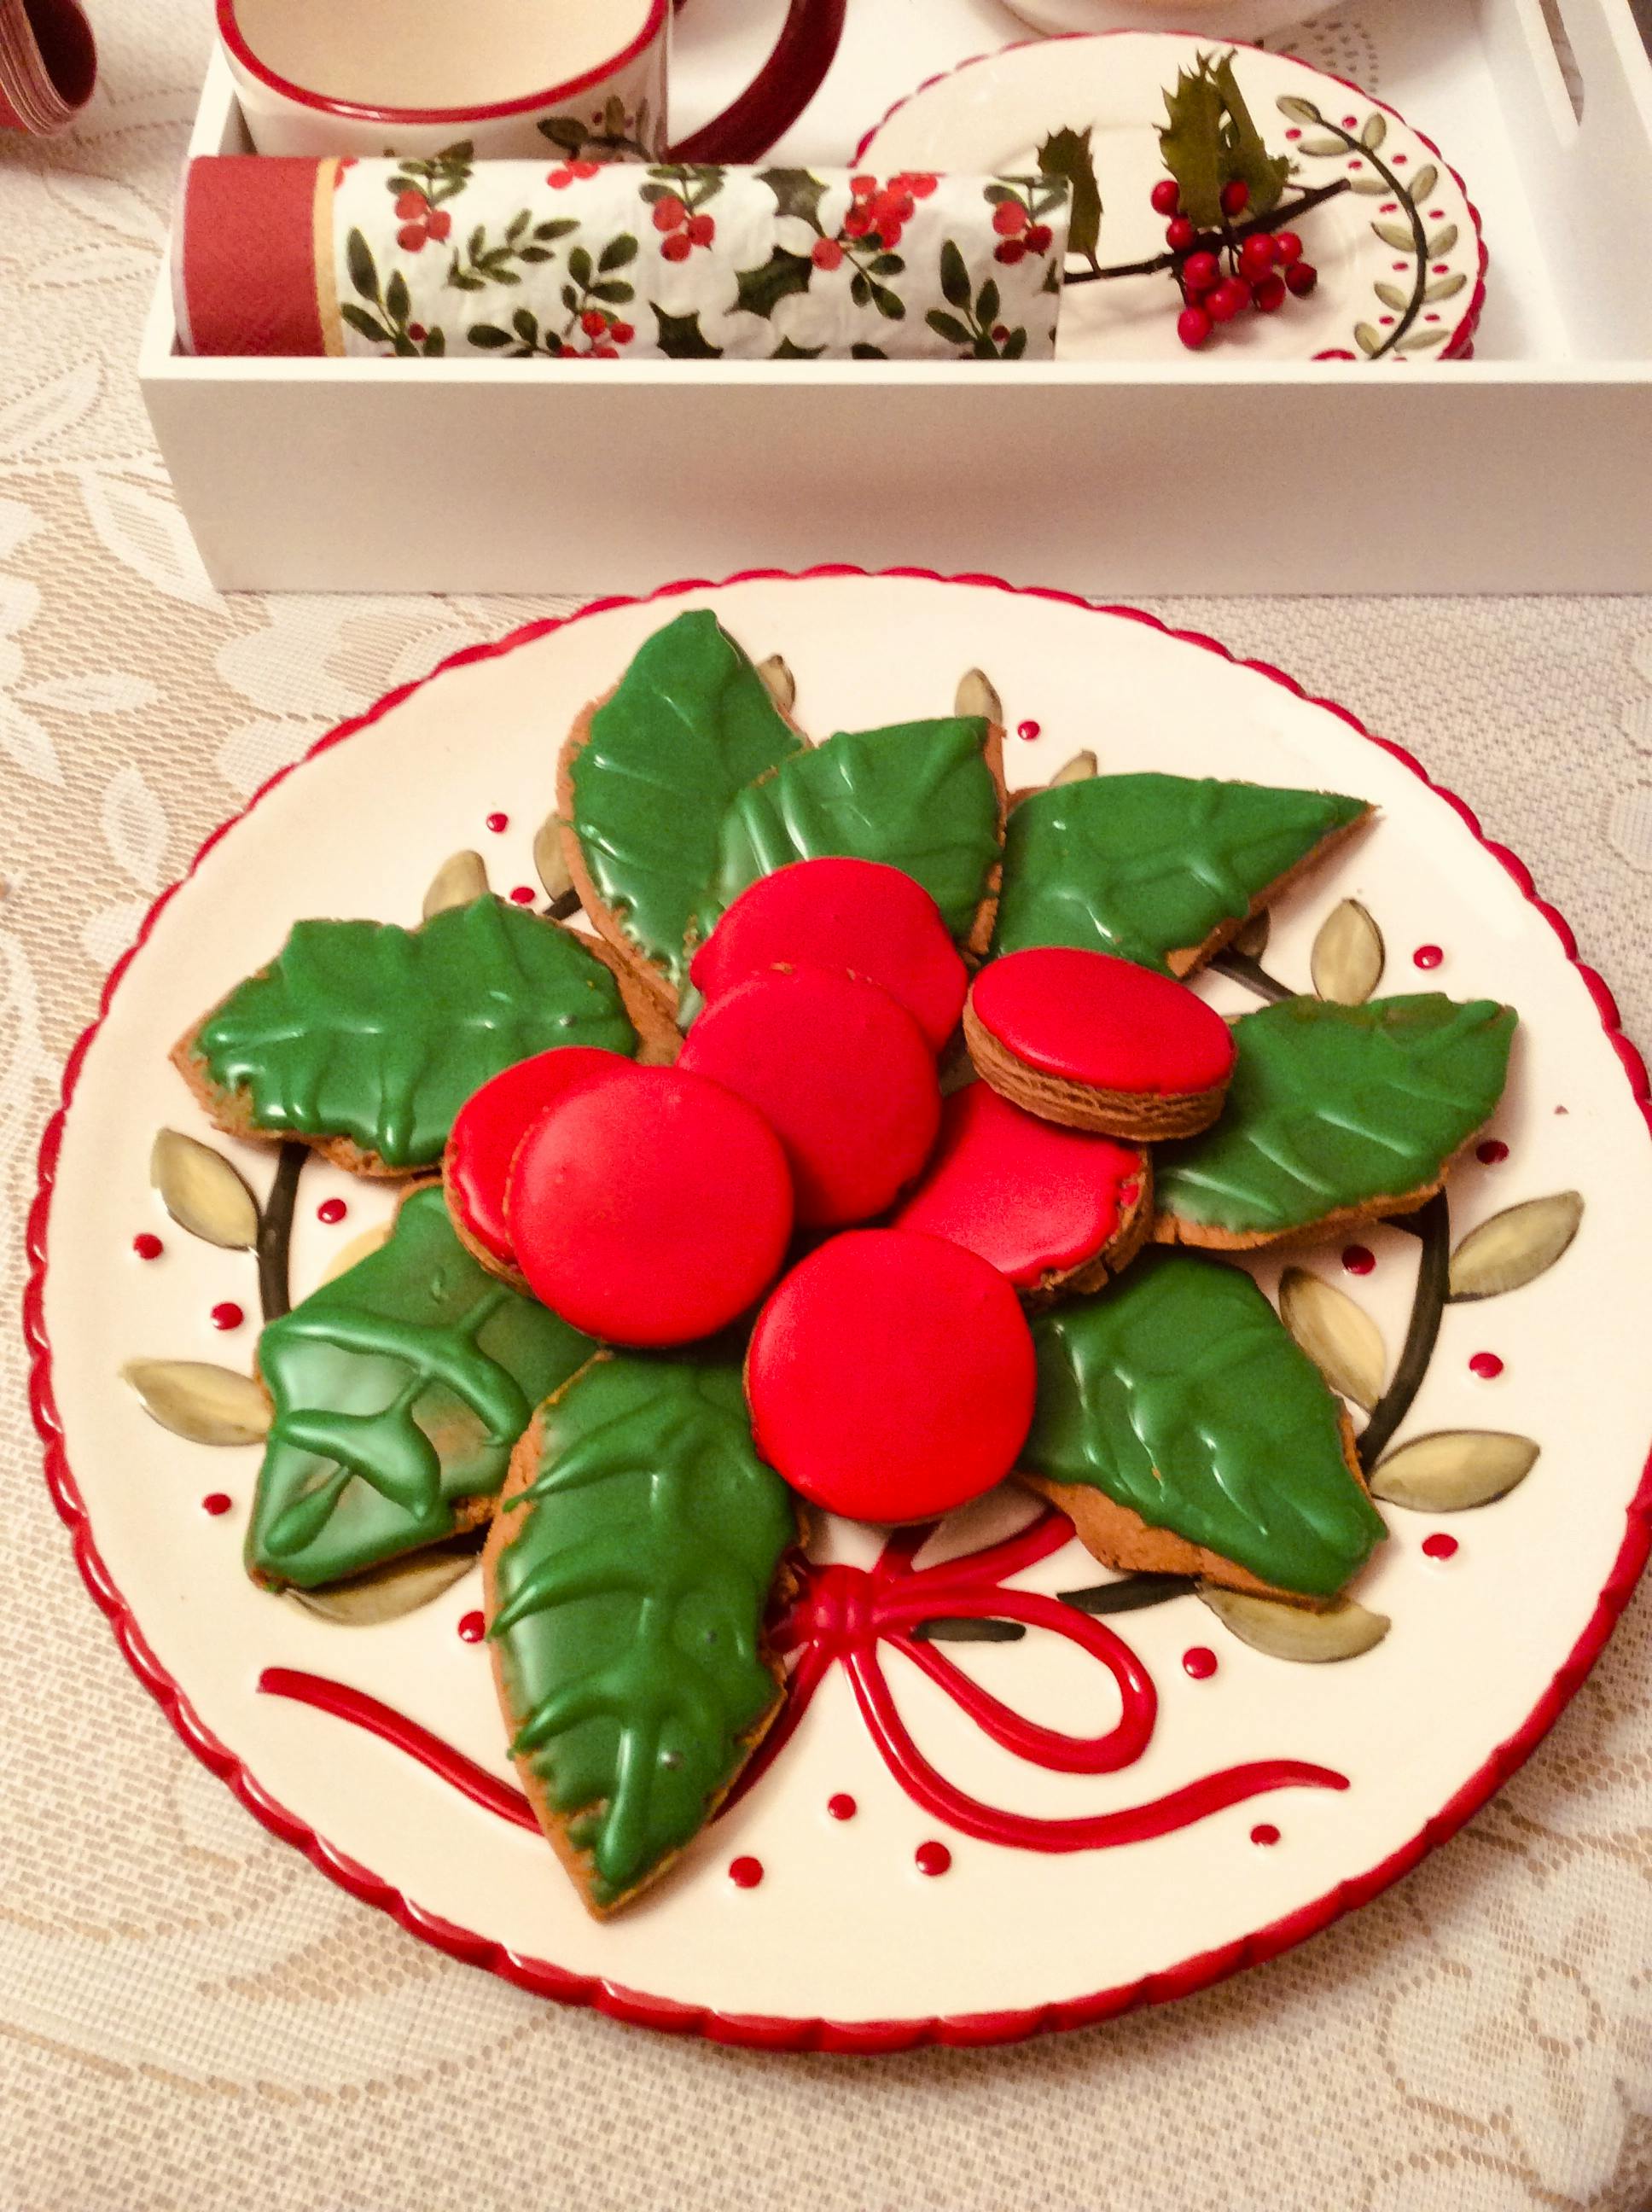 Christmas cookies, anyone? Catherine Sorrey sent in this photo of some bright and merry Christmas Poinsettia cookies from Sydney, Cape Breton. She wrote: “A symbol of purity cheer and success the seasonal poinsettia flower surrounds us at Christmas time… one cannot help but be drawn to the red and green Christmas colours, and of course, the smell of my home baked cookies.” 

I can practically smell them now. We hope you can share the recipe with the rest of us. Thank you for sending this in, Catherine.  

Send in your holiday photos to weather@saltwire.com.